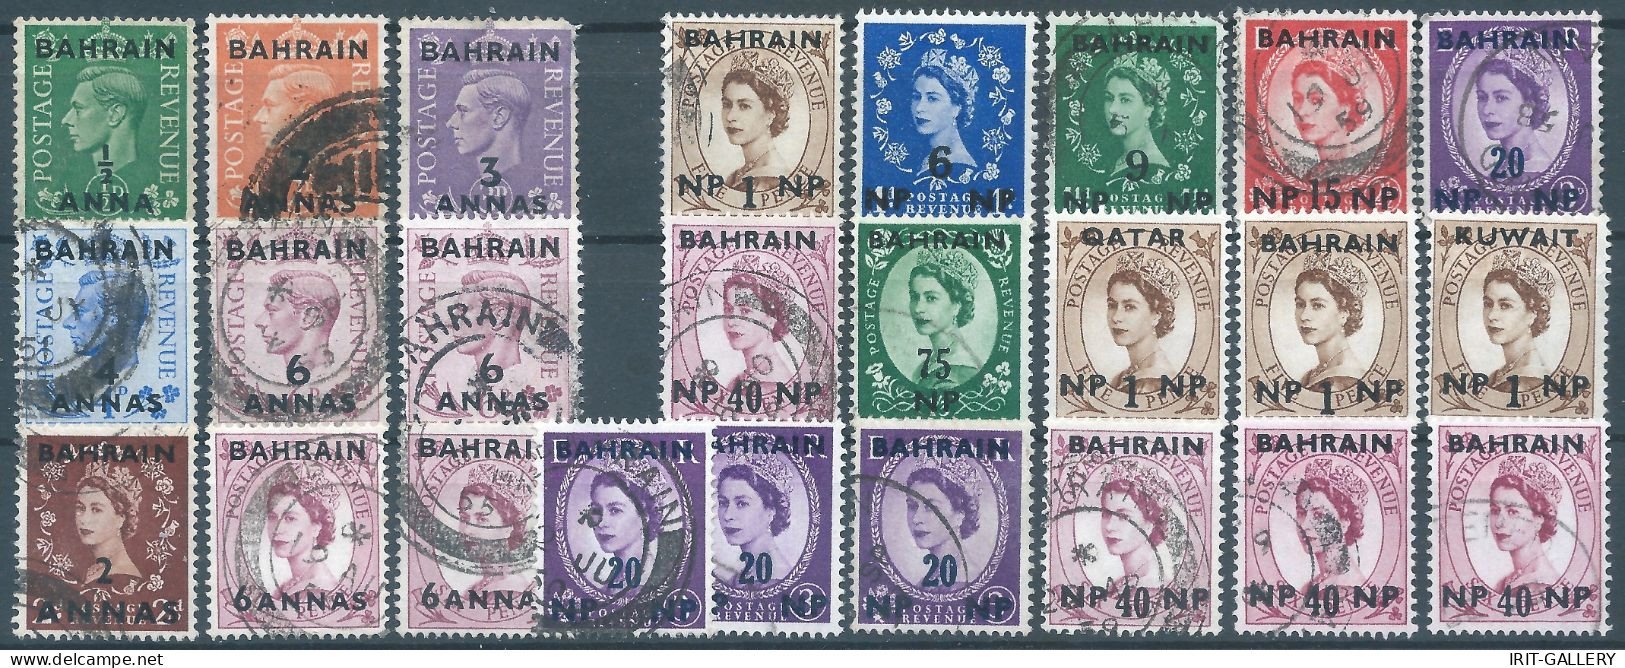 Bahrein,1948-1957 Great Britain Postage & Revenue Stamps Overprinted "BAHRIAN" Used,Mix - Bahrein (...-1965)